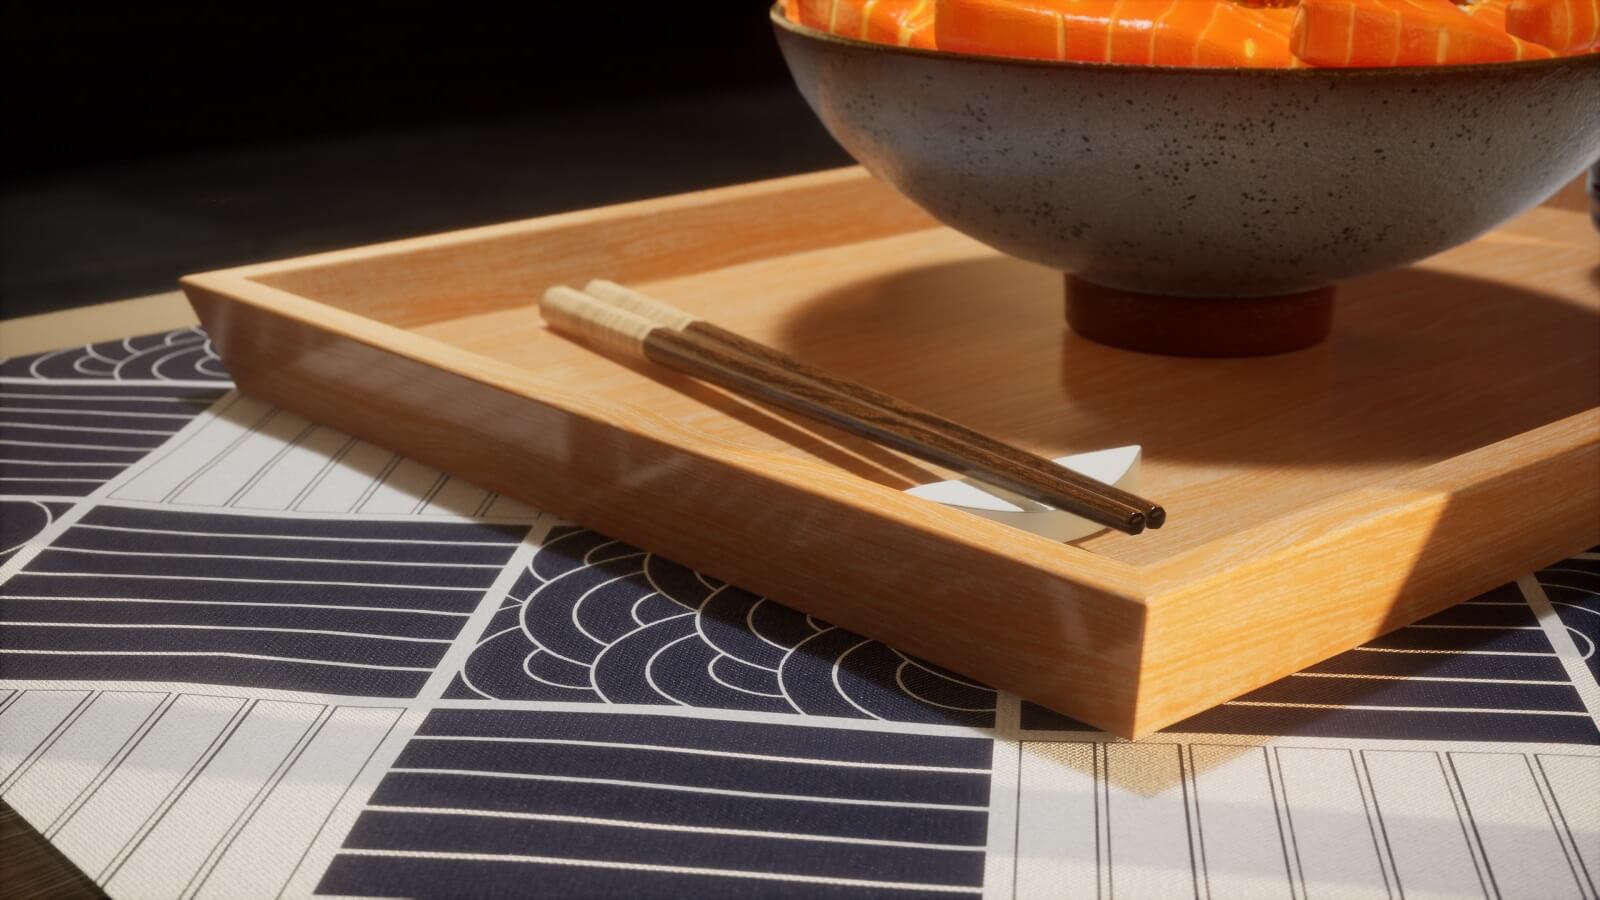 Close-up view of wooden chopsticks on a meal tray